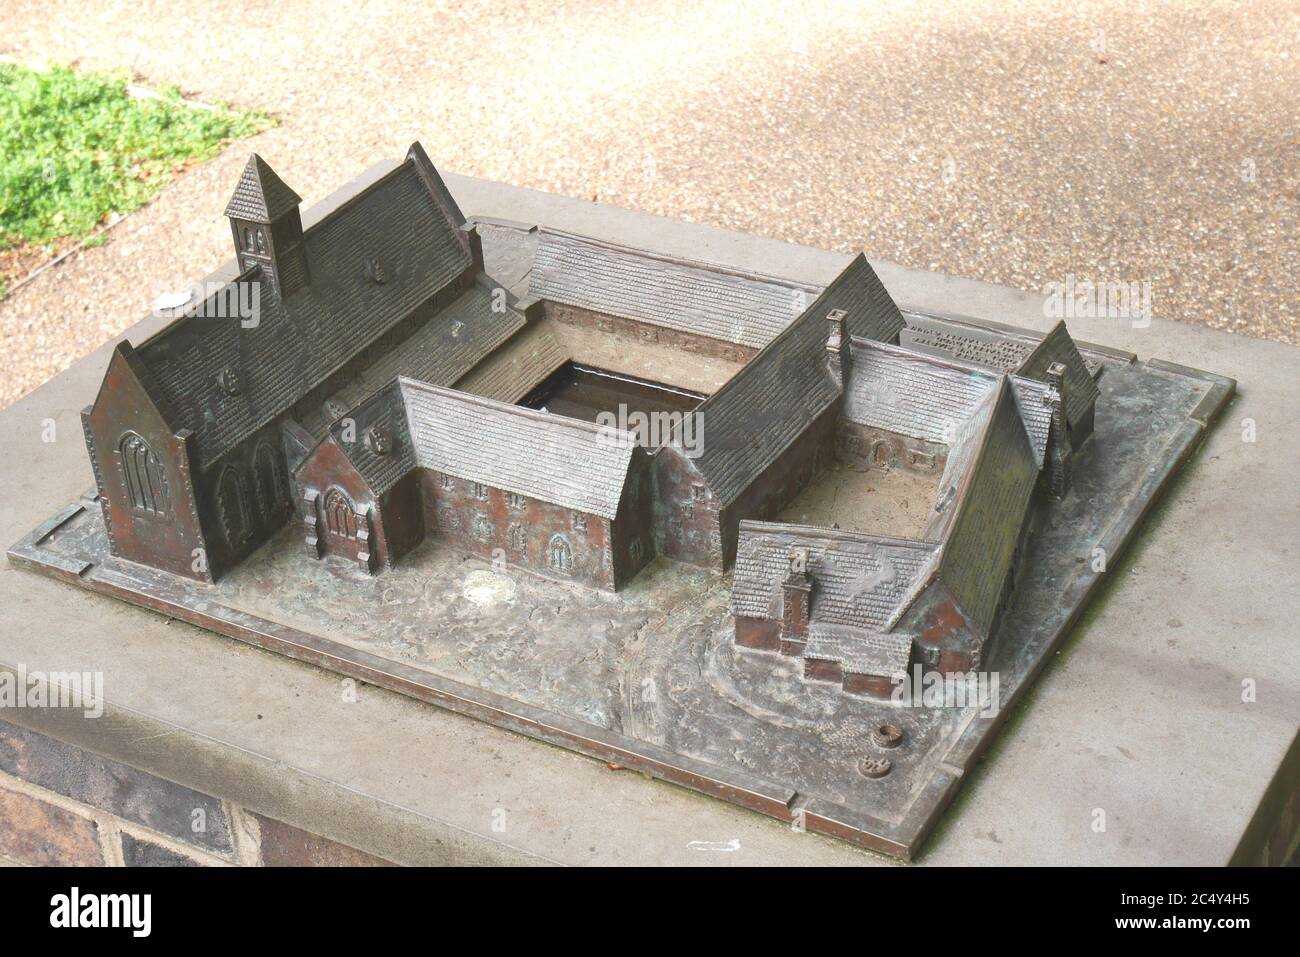 A bronze scale model of the medieval Blackfriars Friary, by artist Rubin Eynon, Bute Park, Cardiff, Wales, United Kingdom Stock Photo